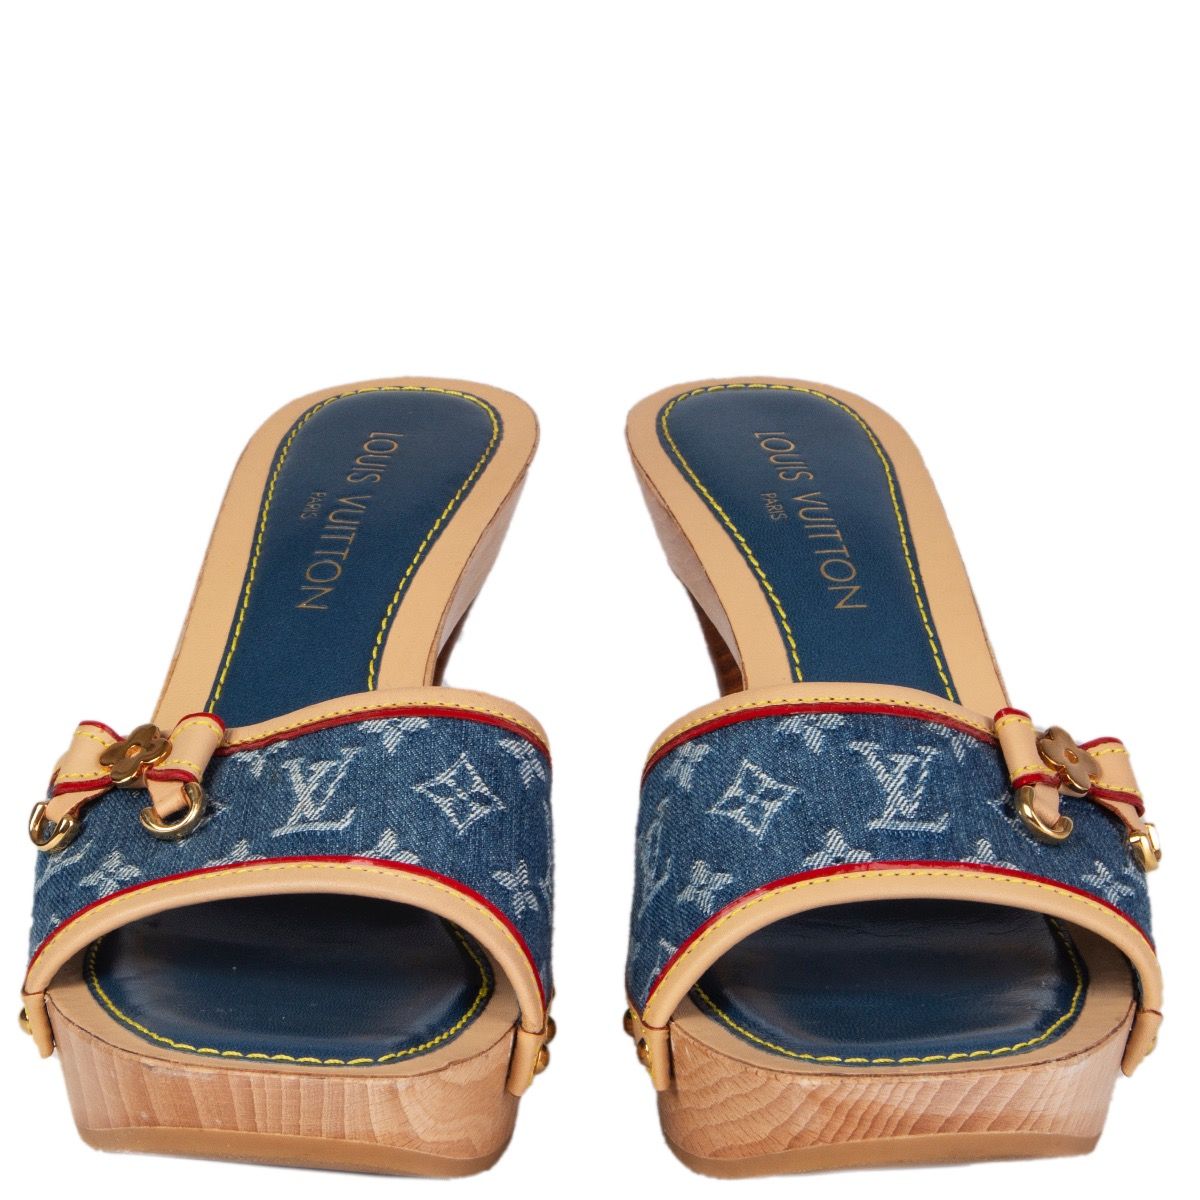 Louis Vuitton Monogrammed Mules in Blue